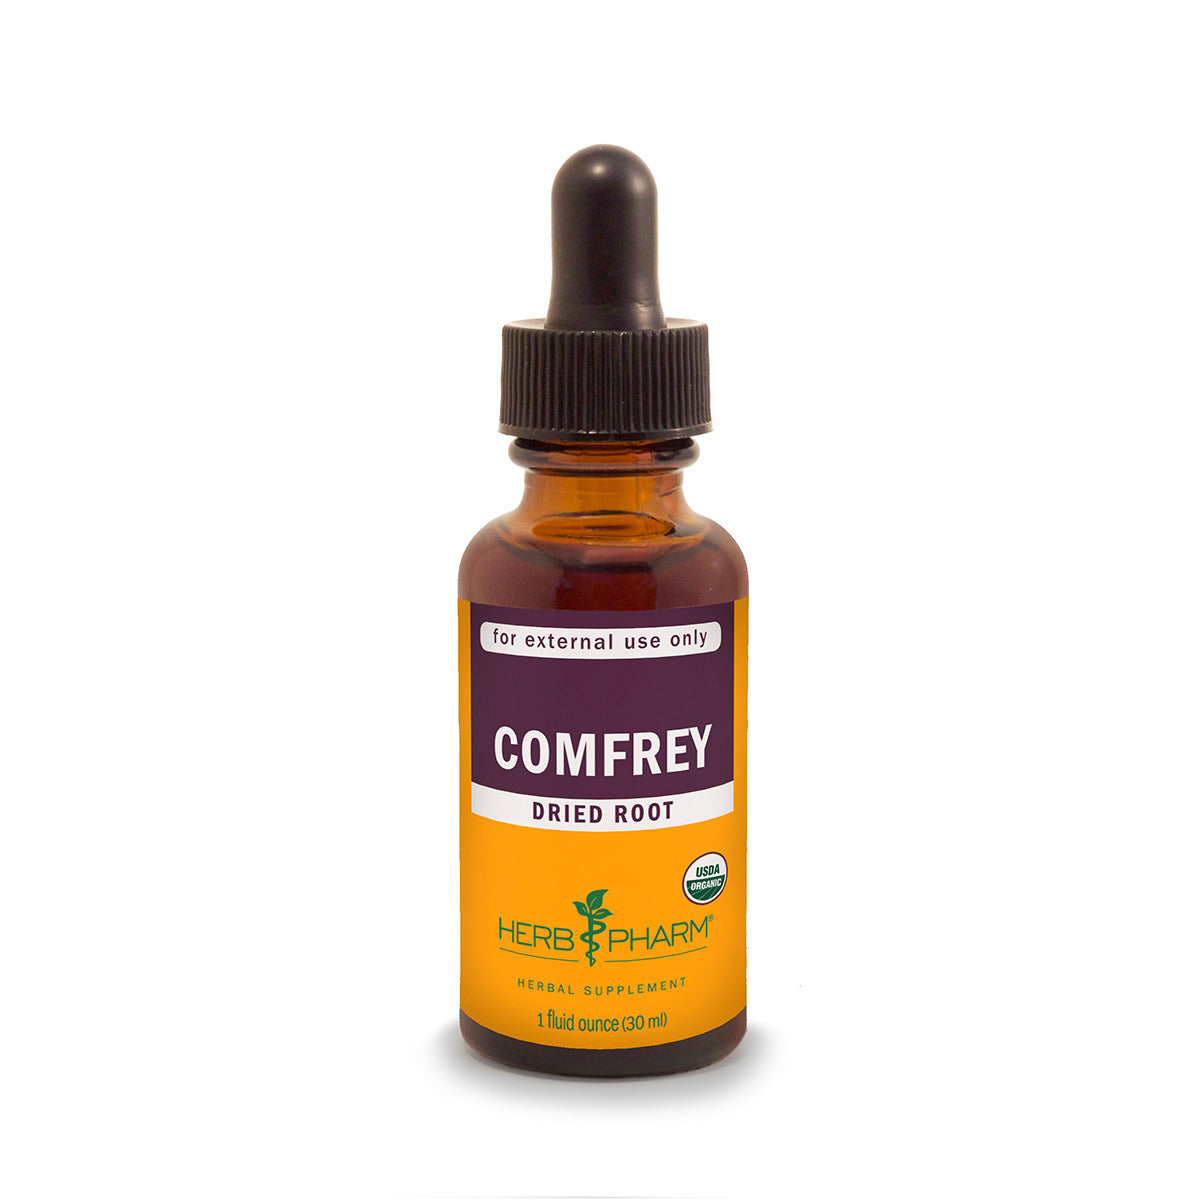 Primary image of Comfrey Extract